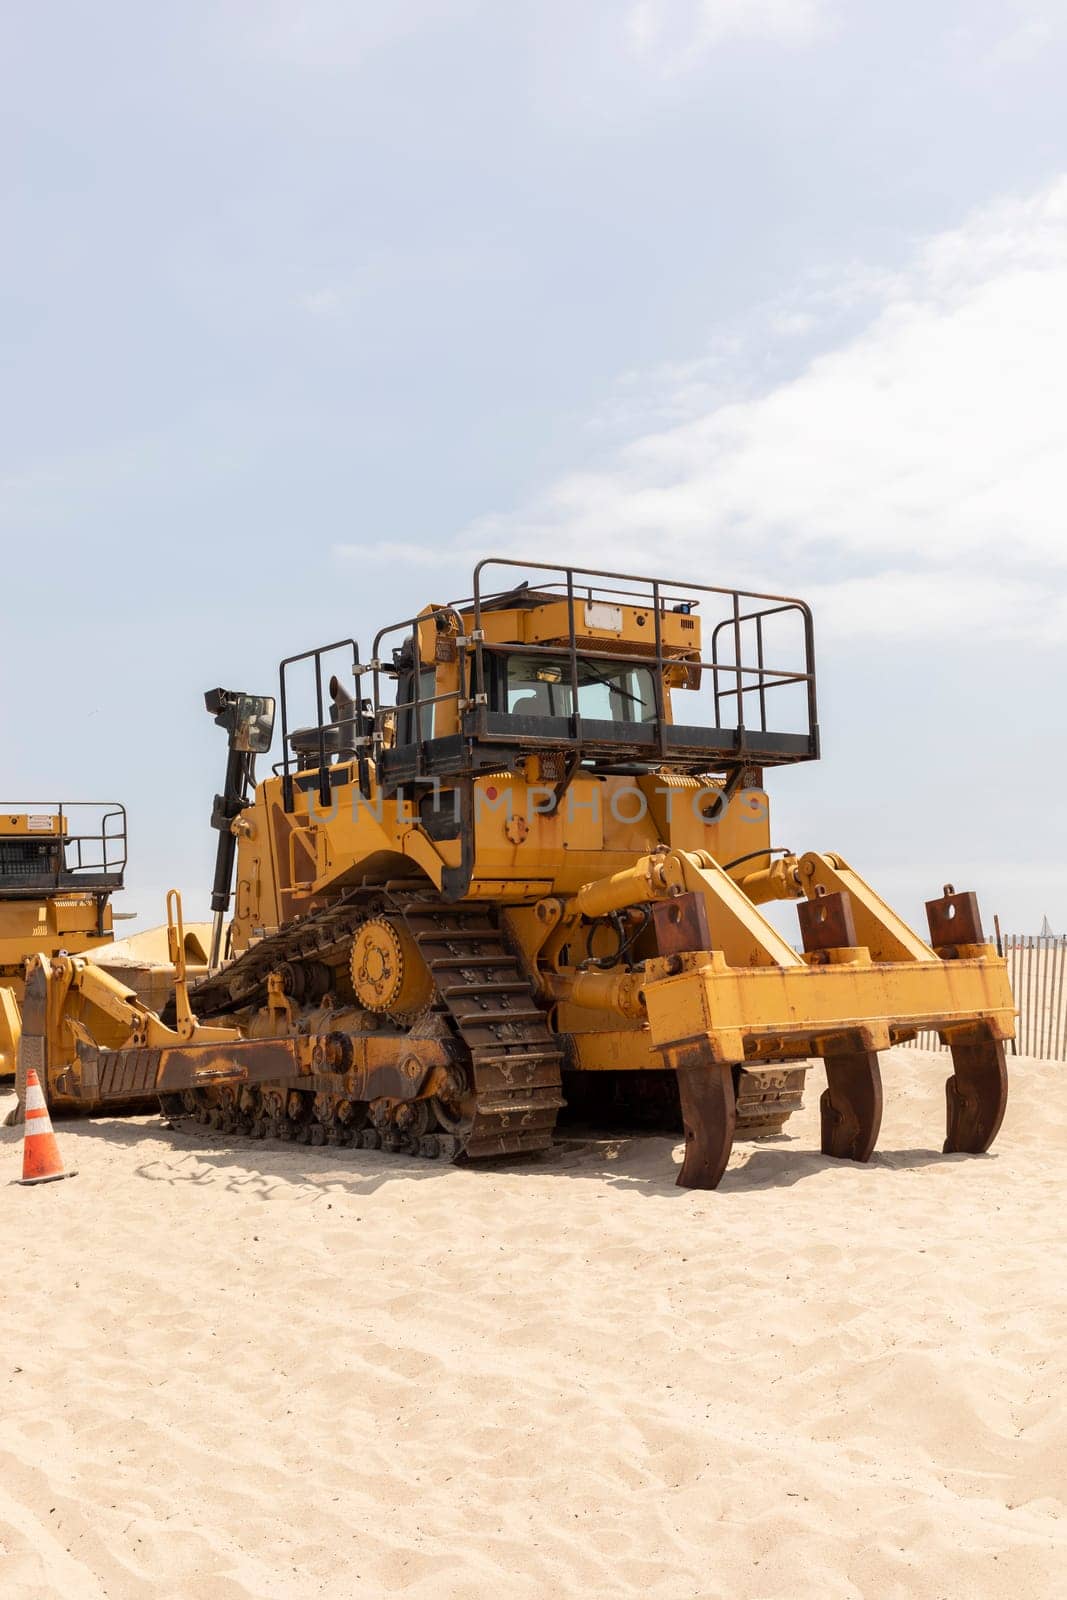 Yellow Crawler Dozer On Sandy Beach, Blue Sky On Background. Bulldozer Builds Roads. Construction And Landfill Equipment And Machinery. No People. Vertical Plane. High quality photo